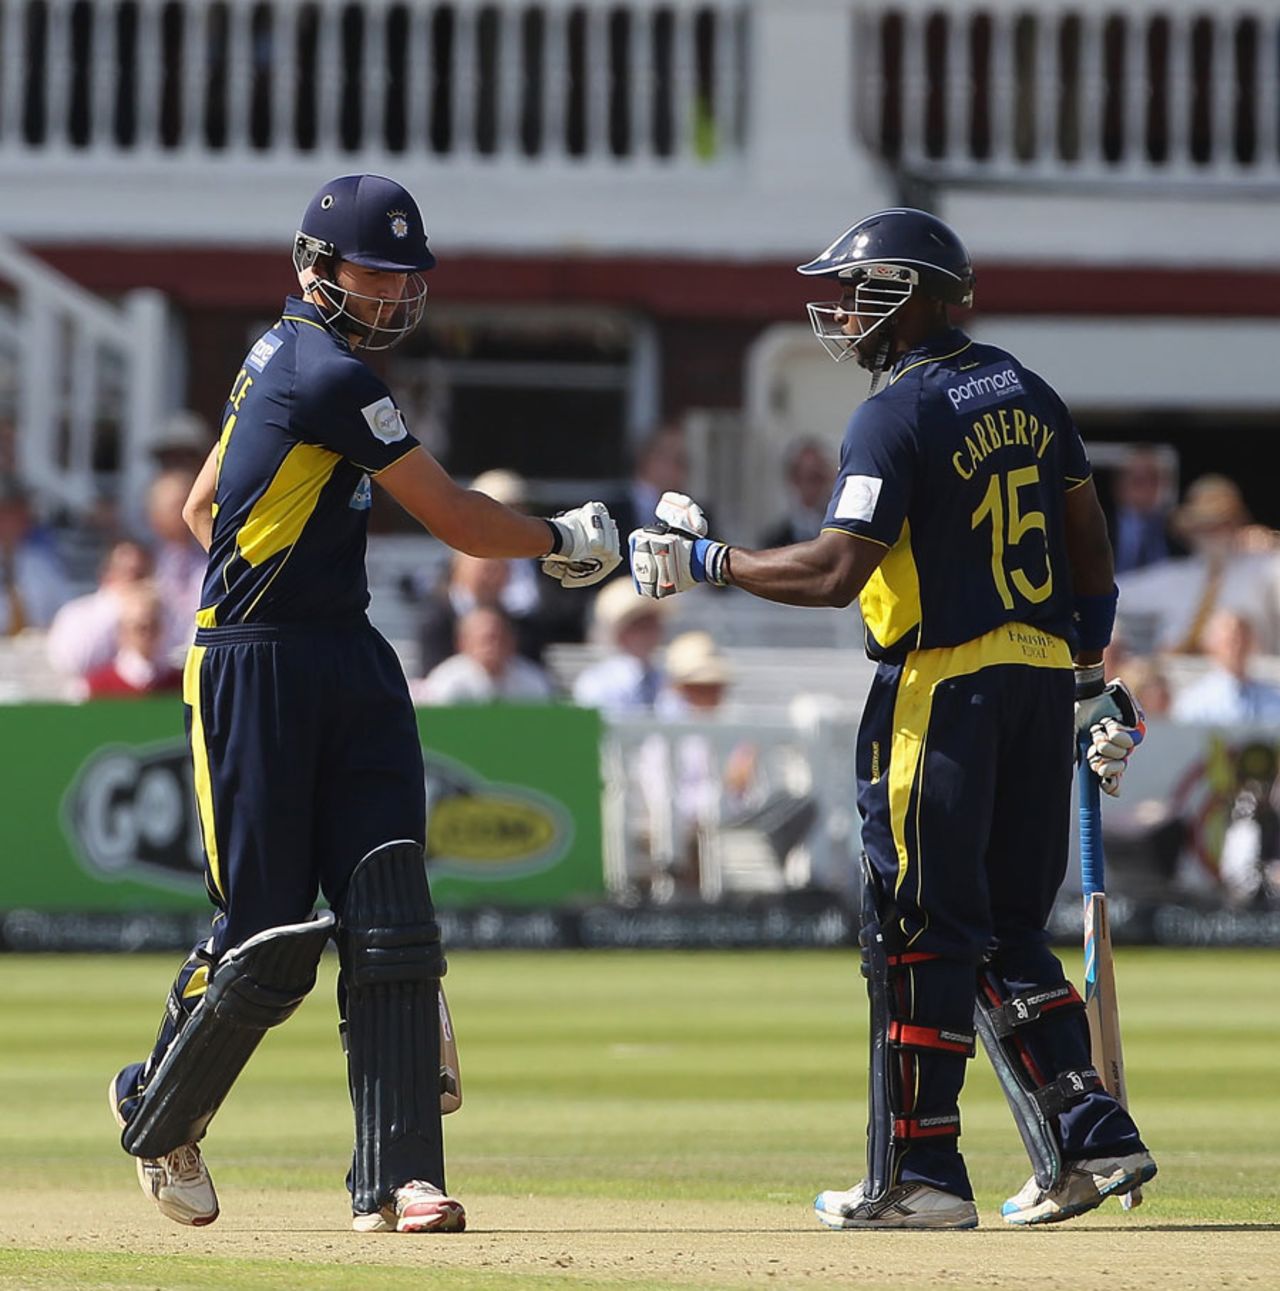 Michael Carberry and James Vince enjoyed a solid opening stand, Hampshire v Warwickshire, CB40 Final, Lord's, September, 15, 2012